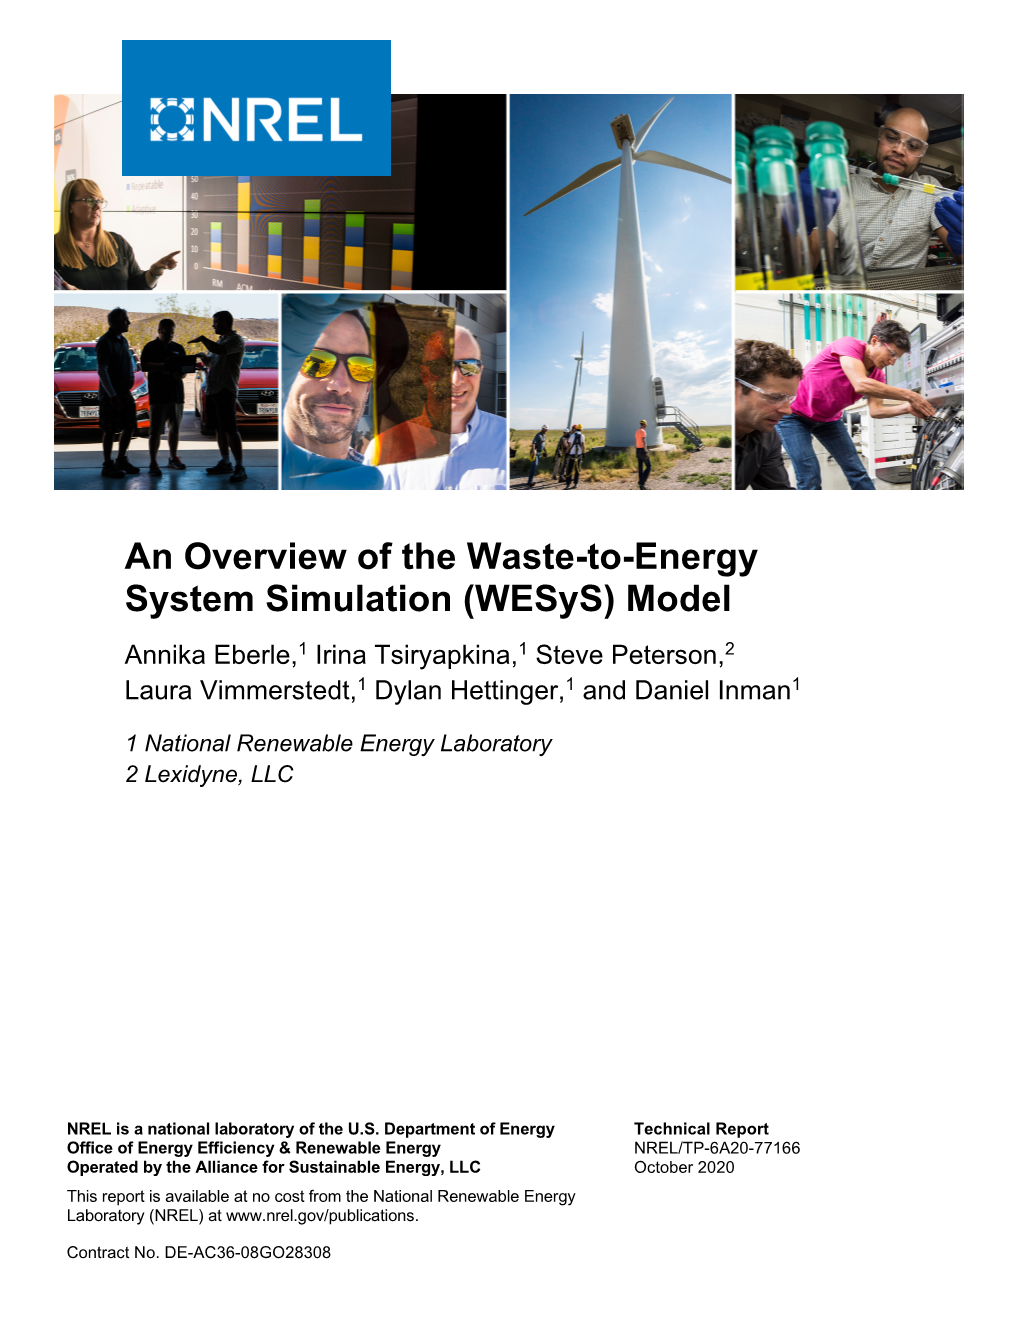 An Overview of the Waste-To-Energy System Simulation (Wesys) Model